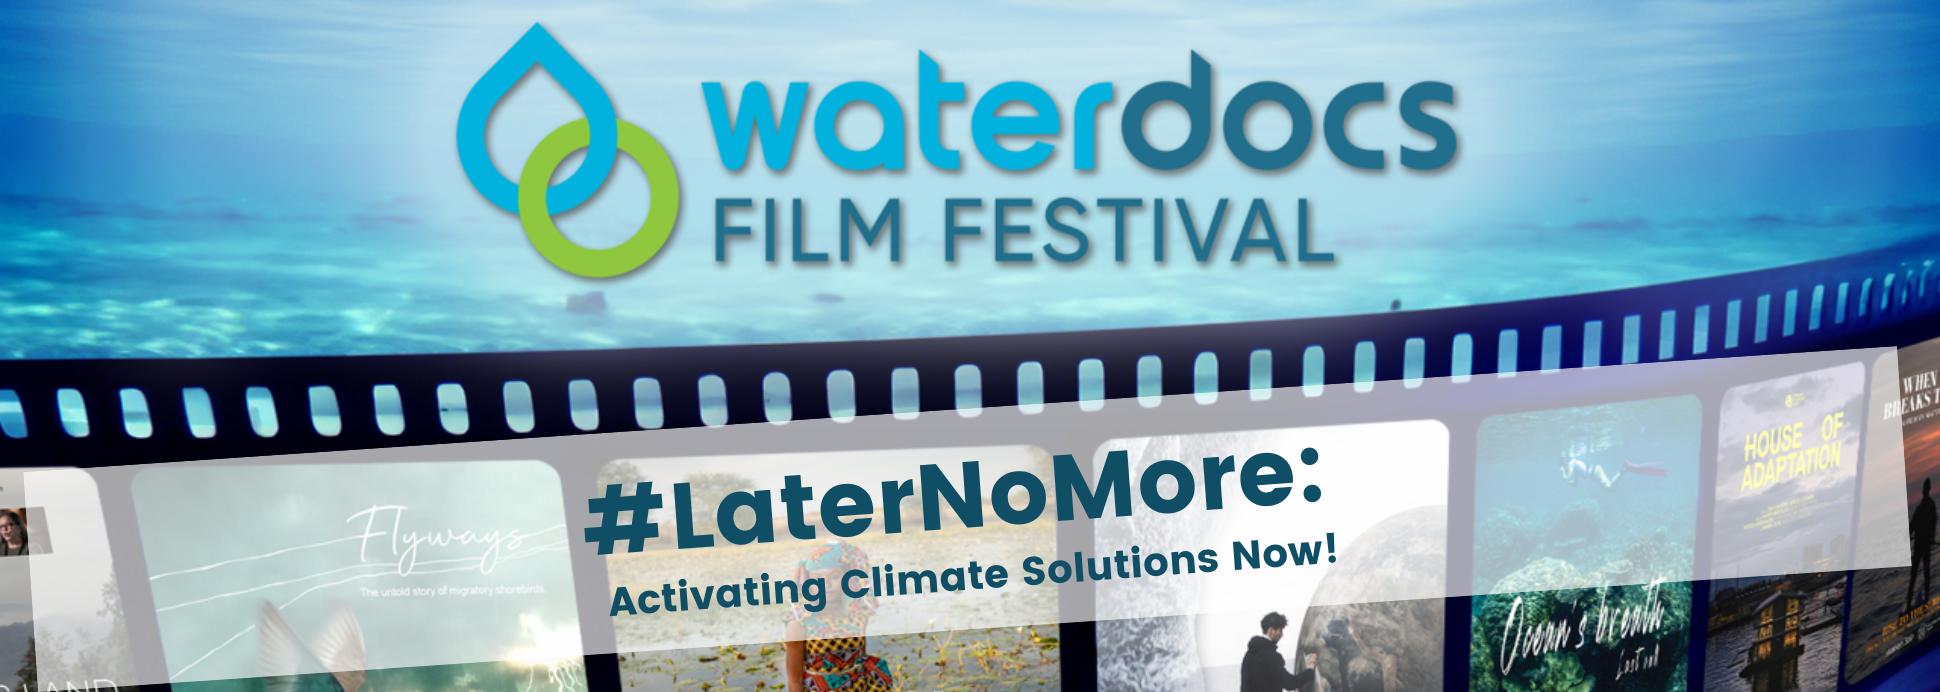 The 2023 Water Docs Film Festival